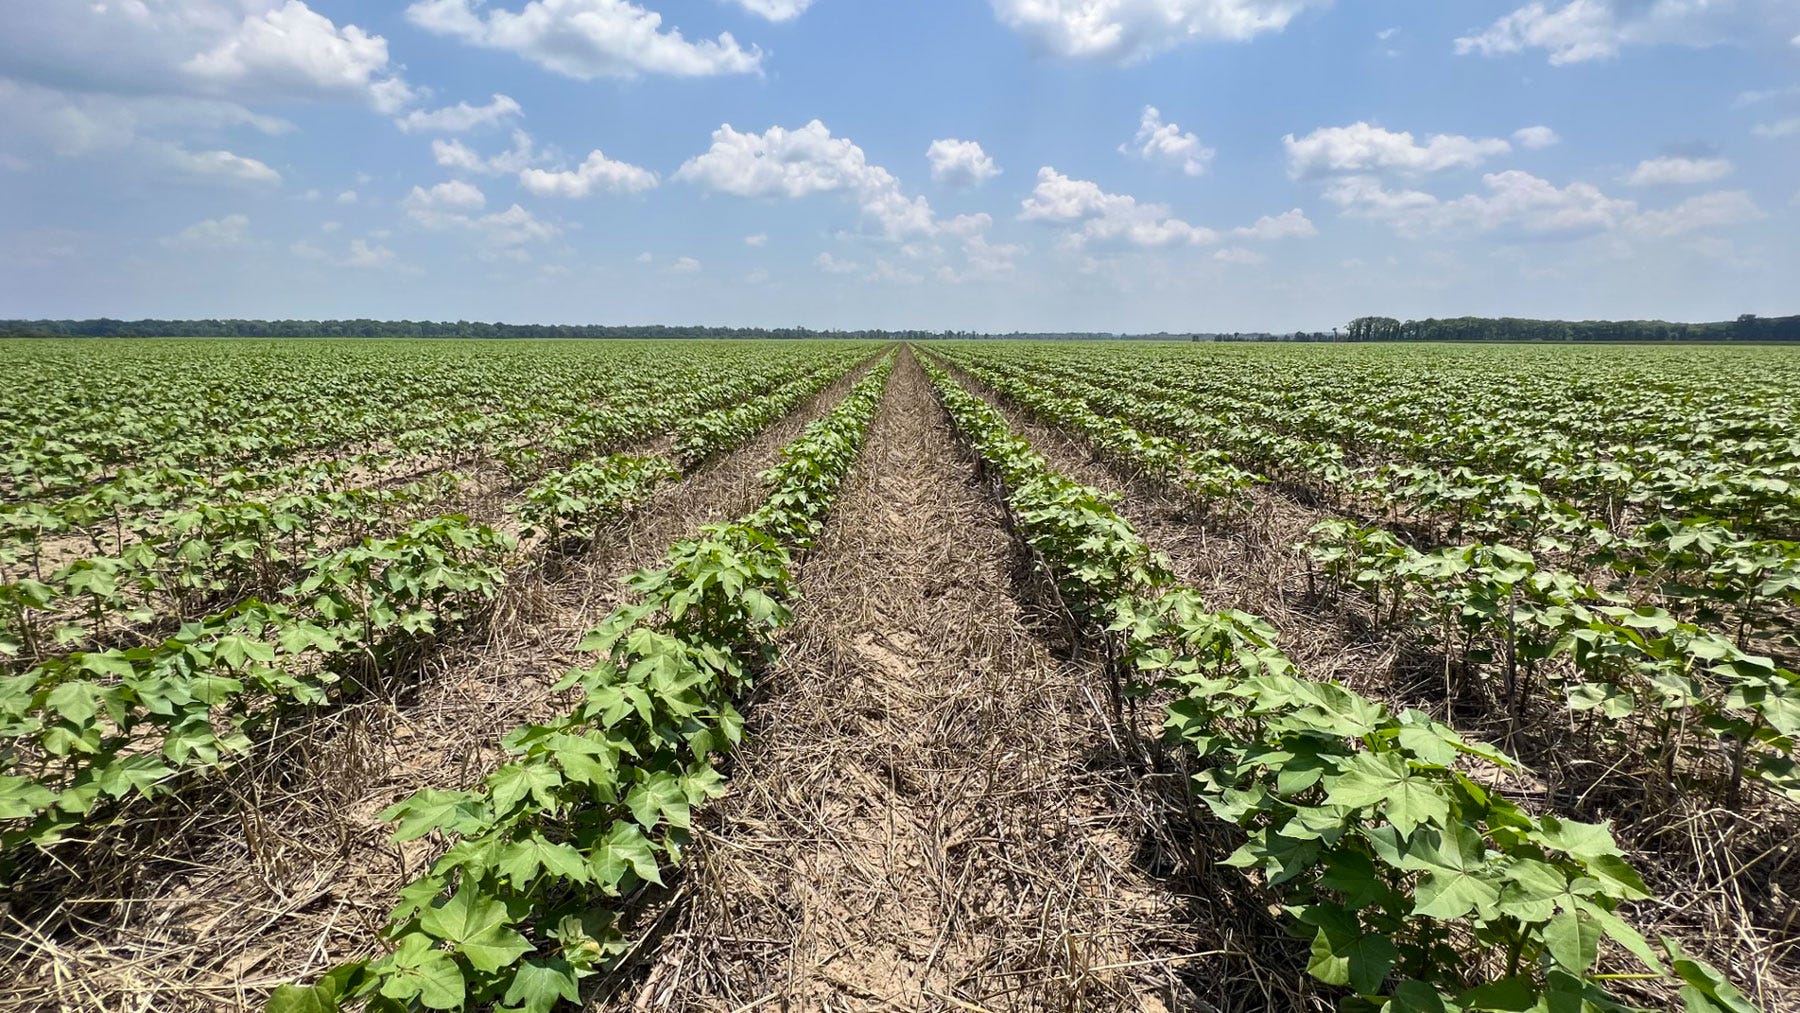 Field with rows of cotton grown in a conservation cover cropping system